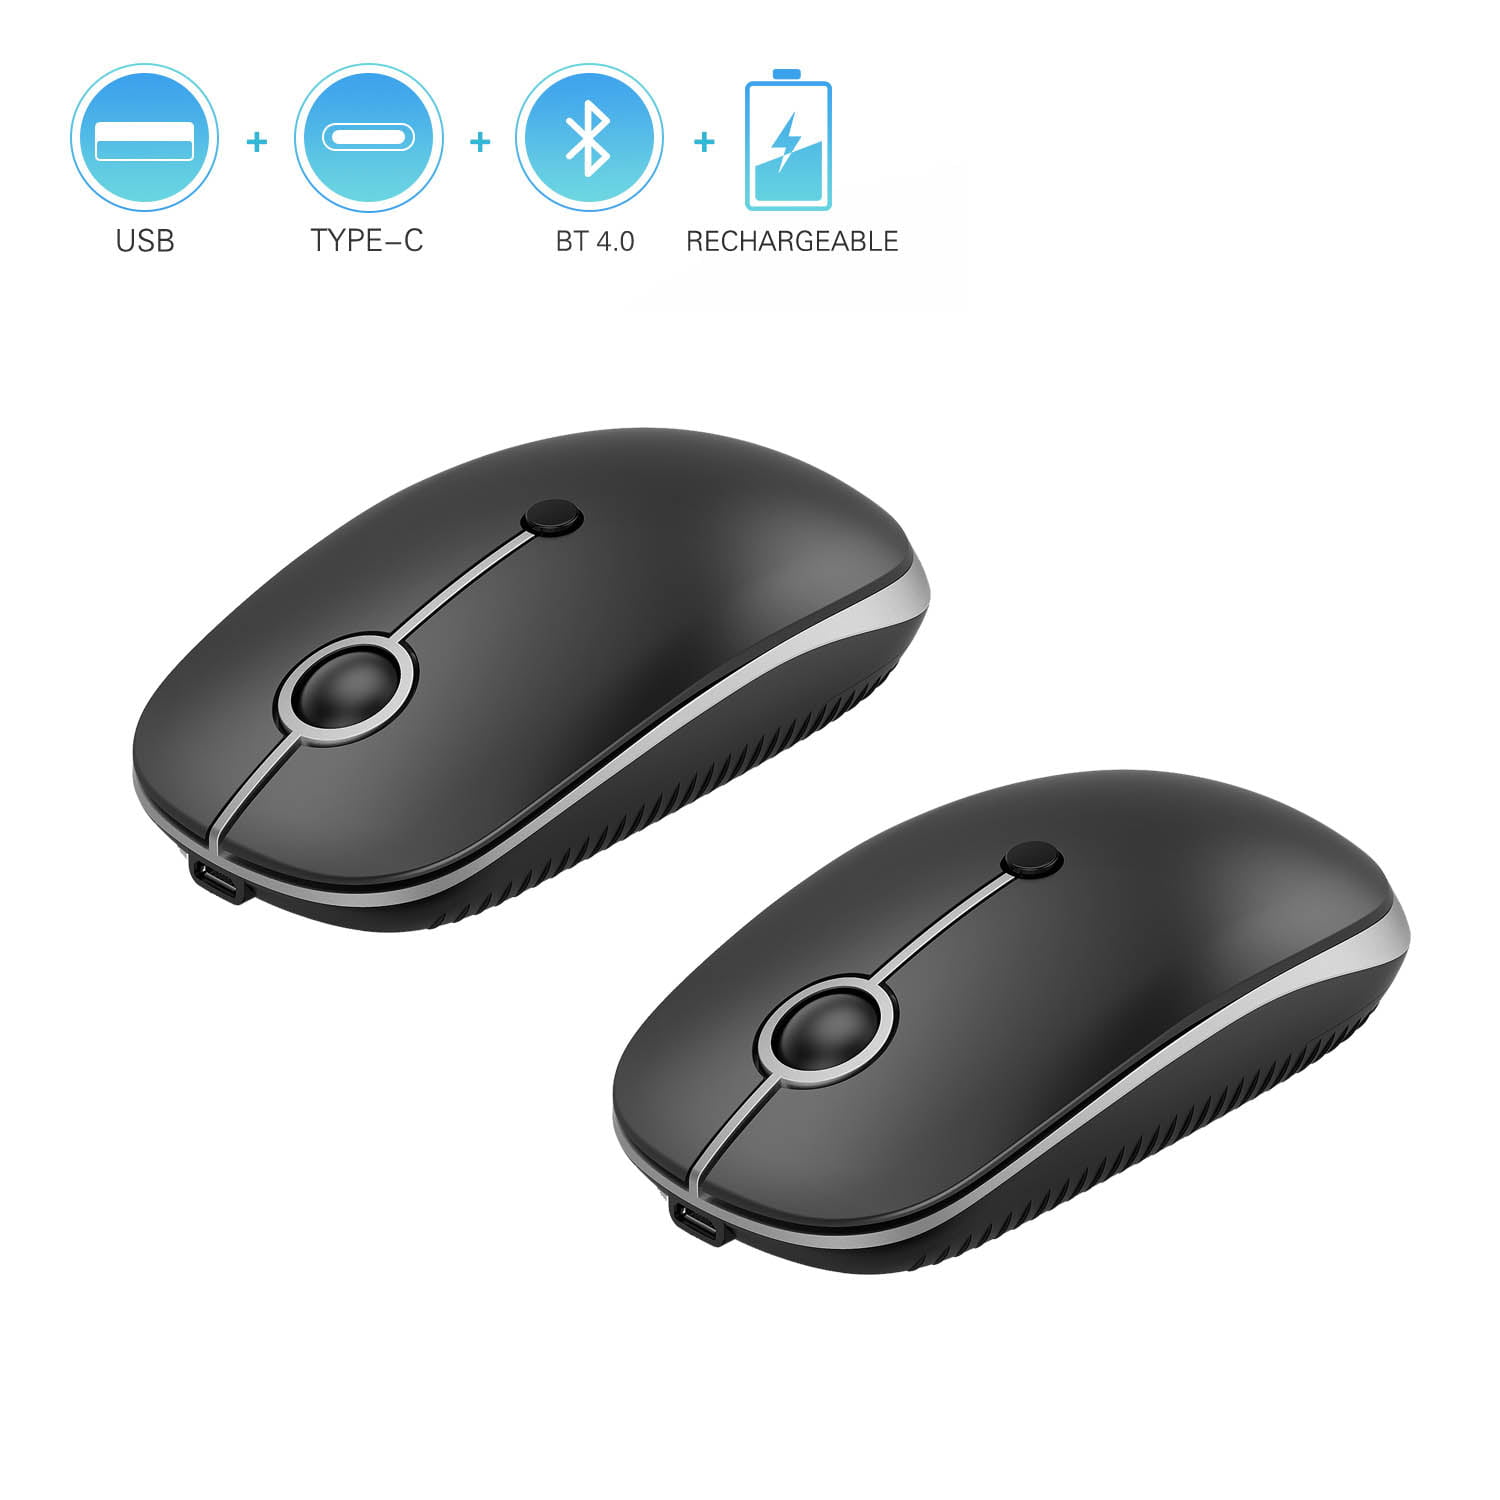 Dachshund Dog Bones 2.4G Wireless Mouse with Cute Pattern Design for All Laptops and Desktops with Nano Receiver